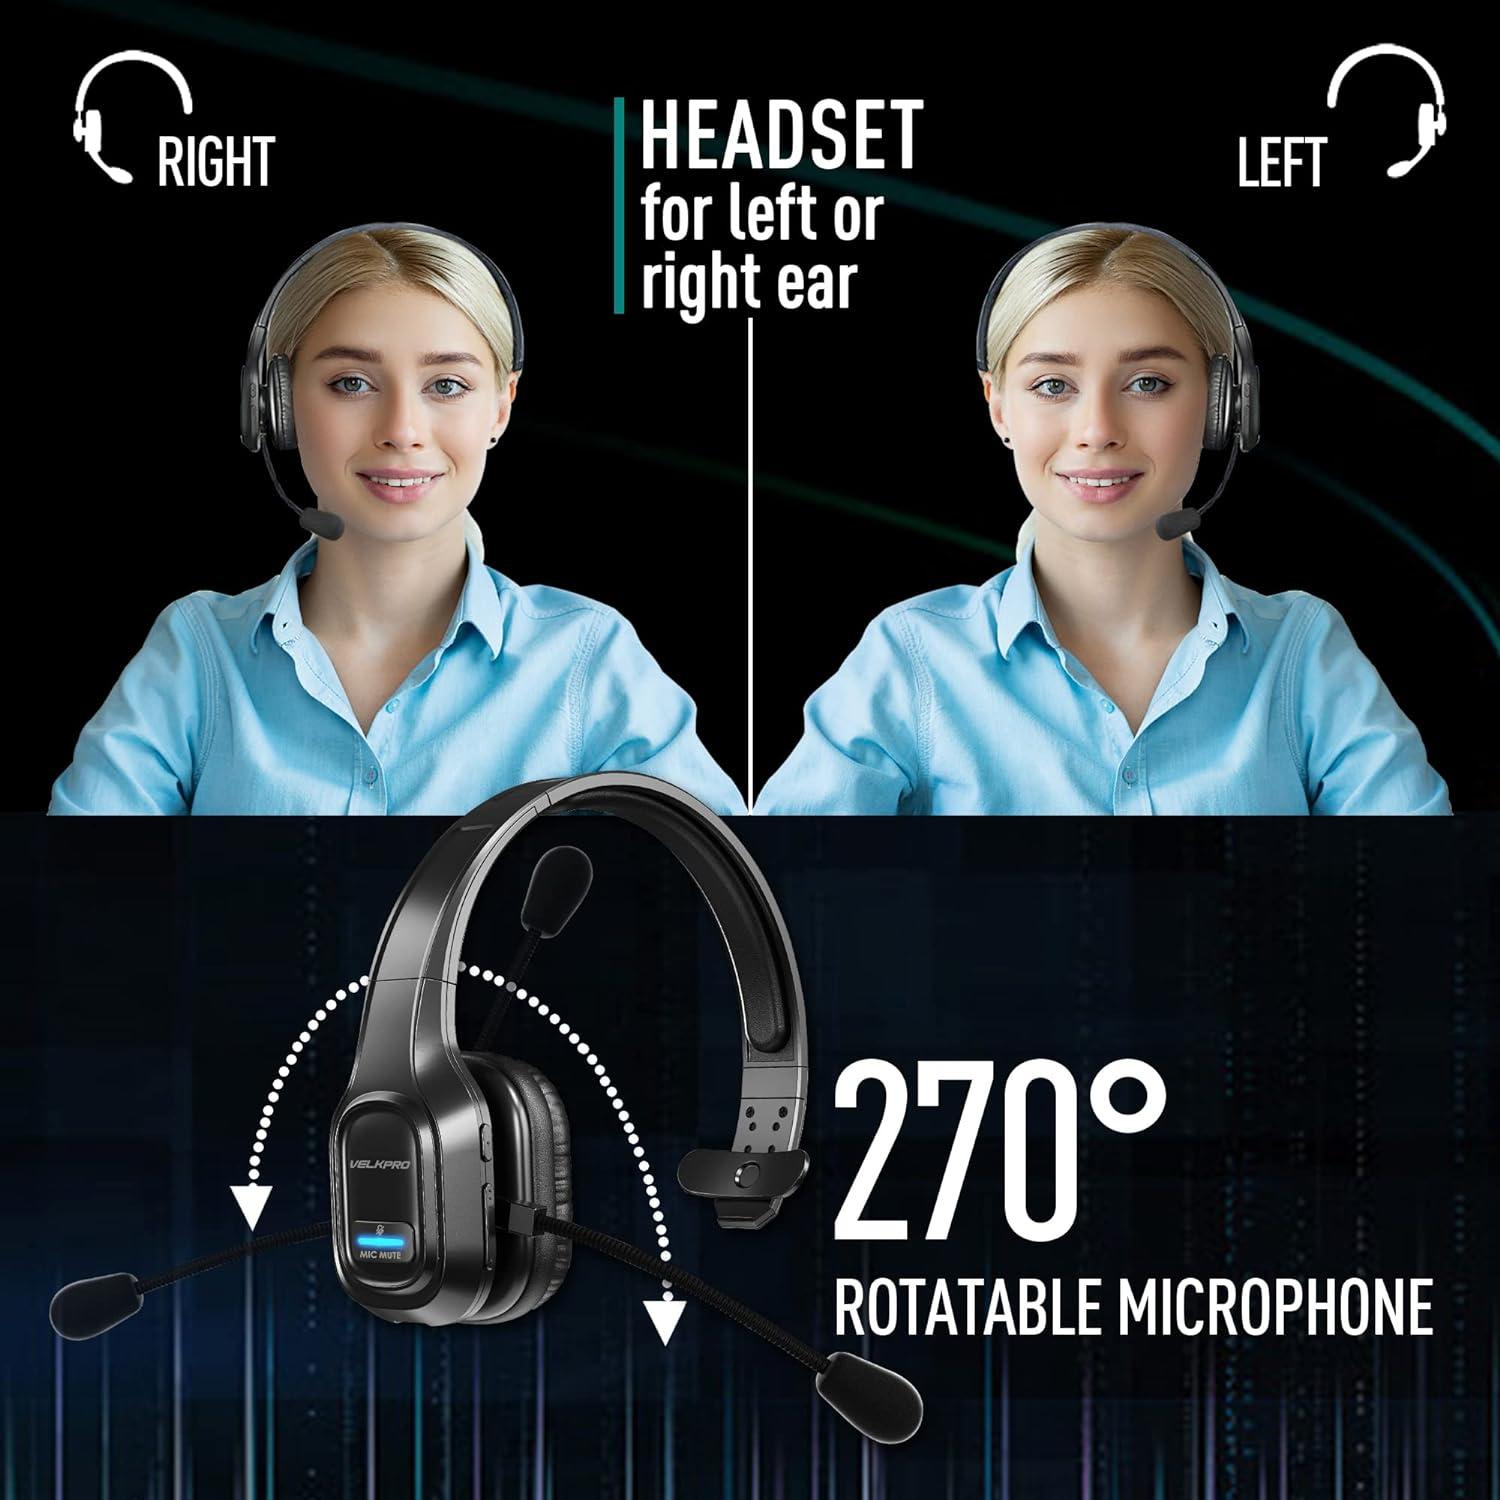 VELKPRO Wireless Headset with Microphone - Comfortable Single-Ear